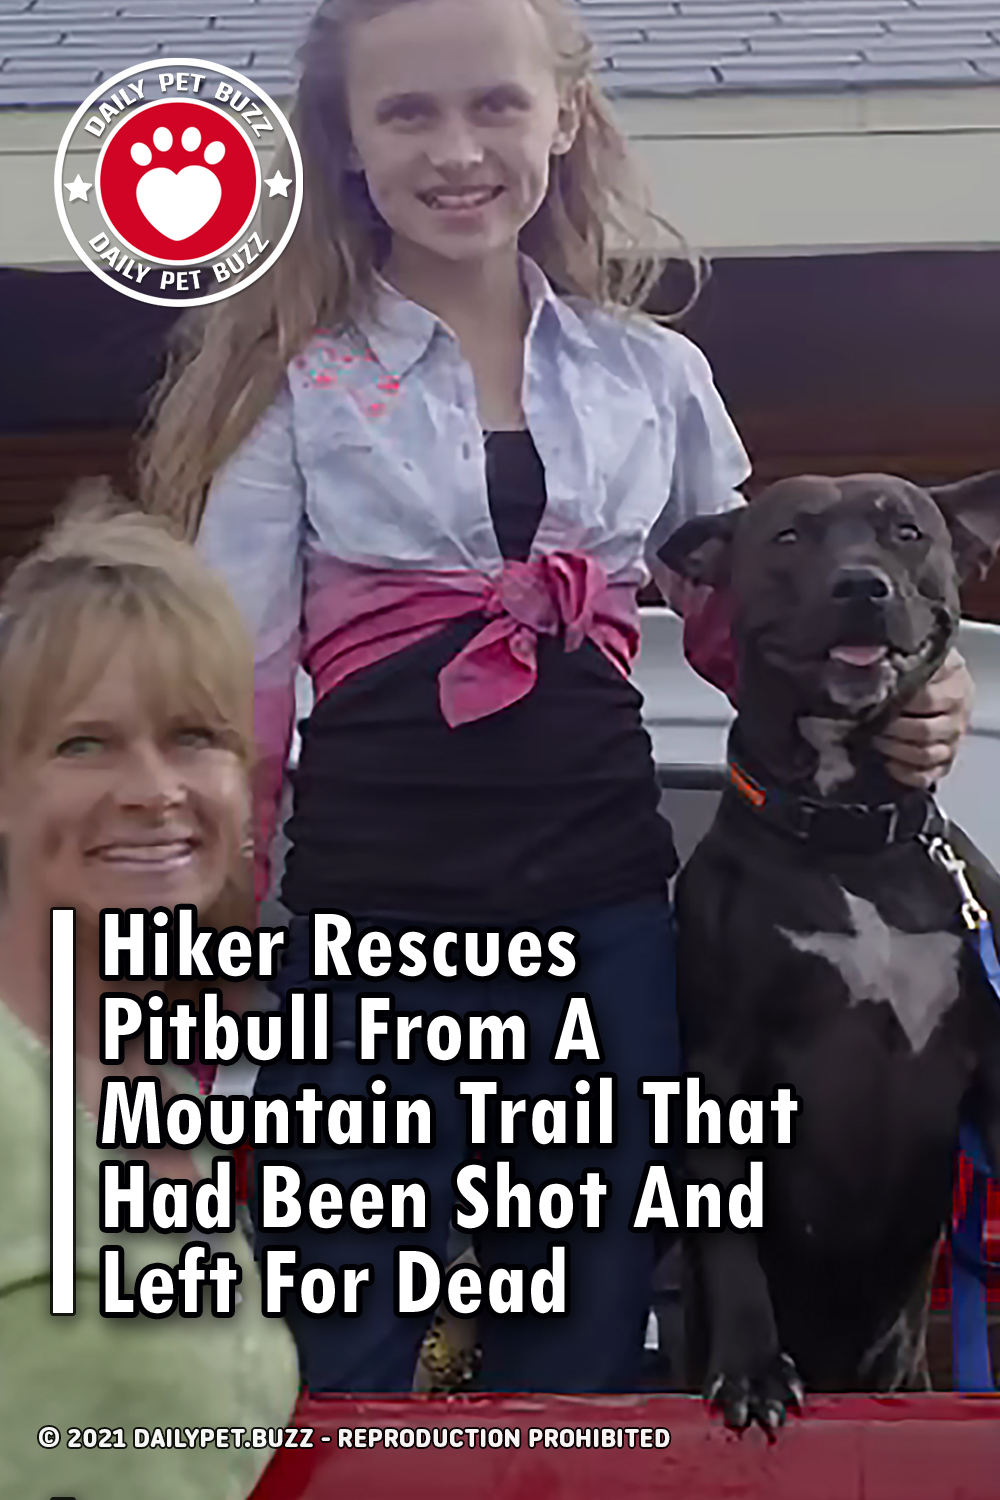 Hiker Rescues Pitbull From A Mountain Trail That Had Been Shot And Left For Dead